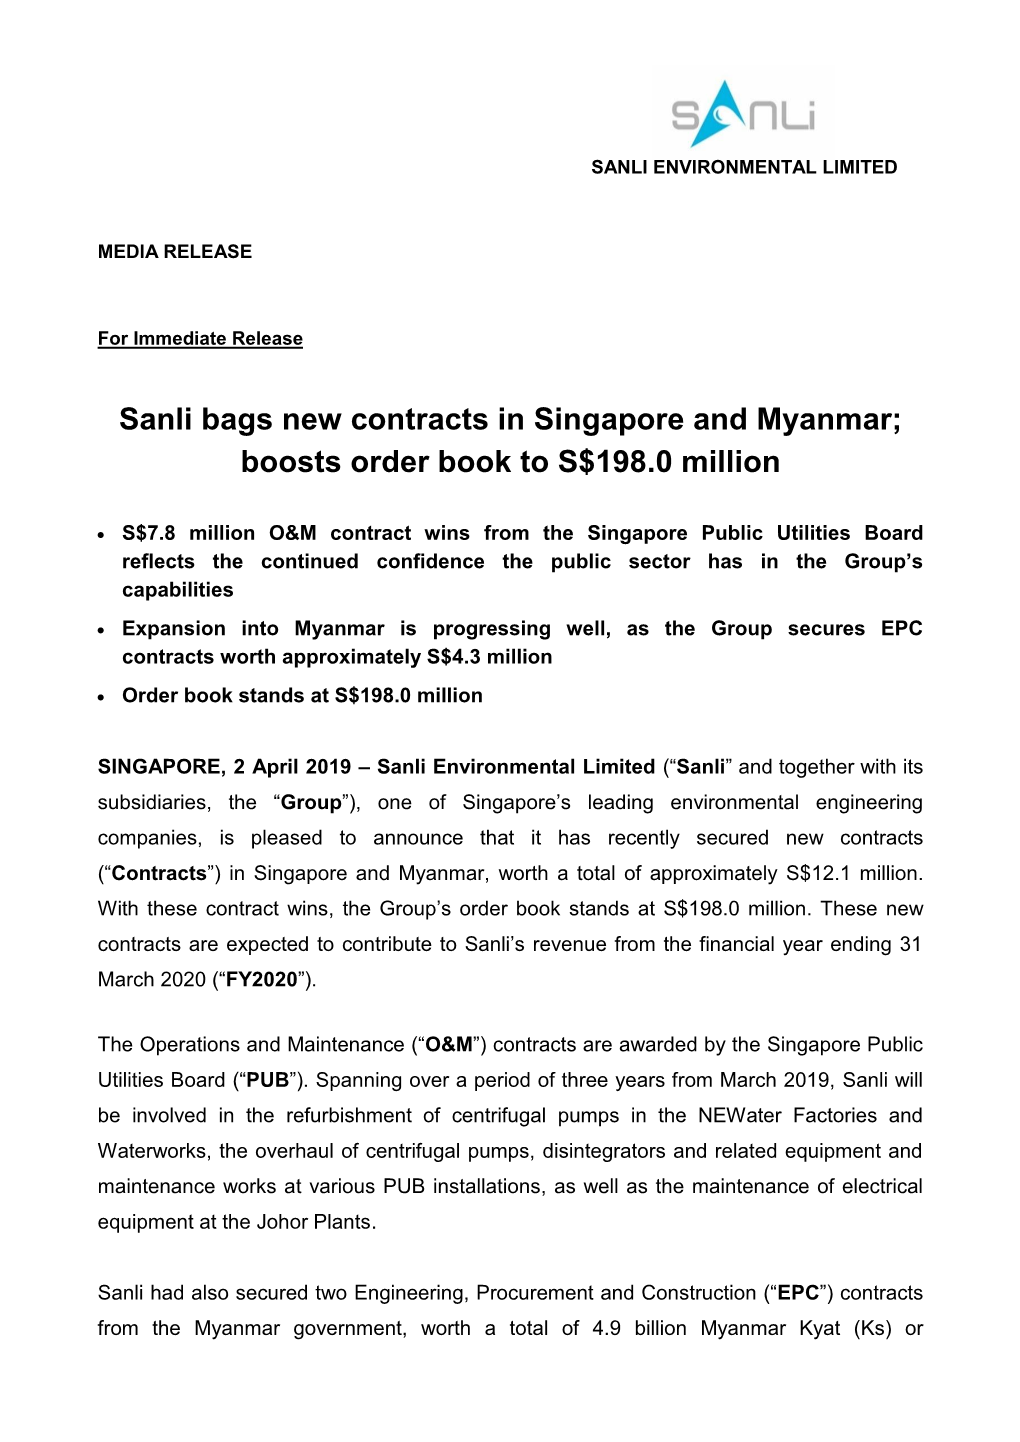 Sanli Bags New Contracts in Singapore and Myanmar; Boosts Order Book to S$198.0 Million